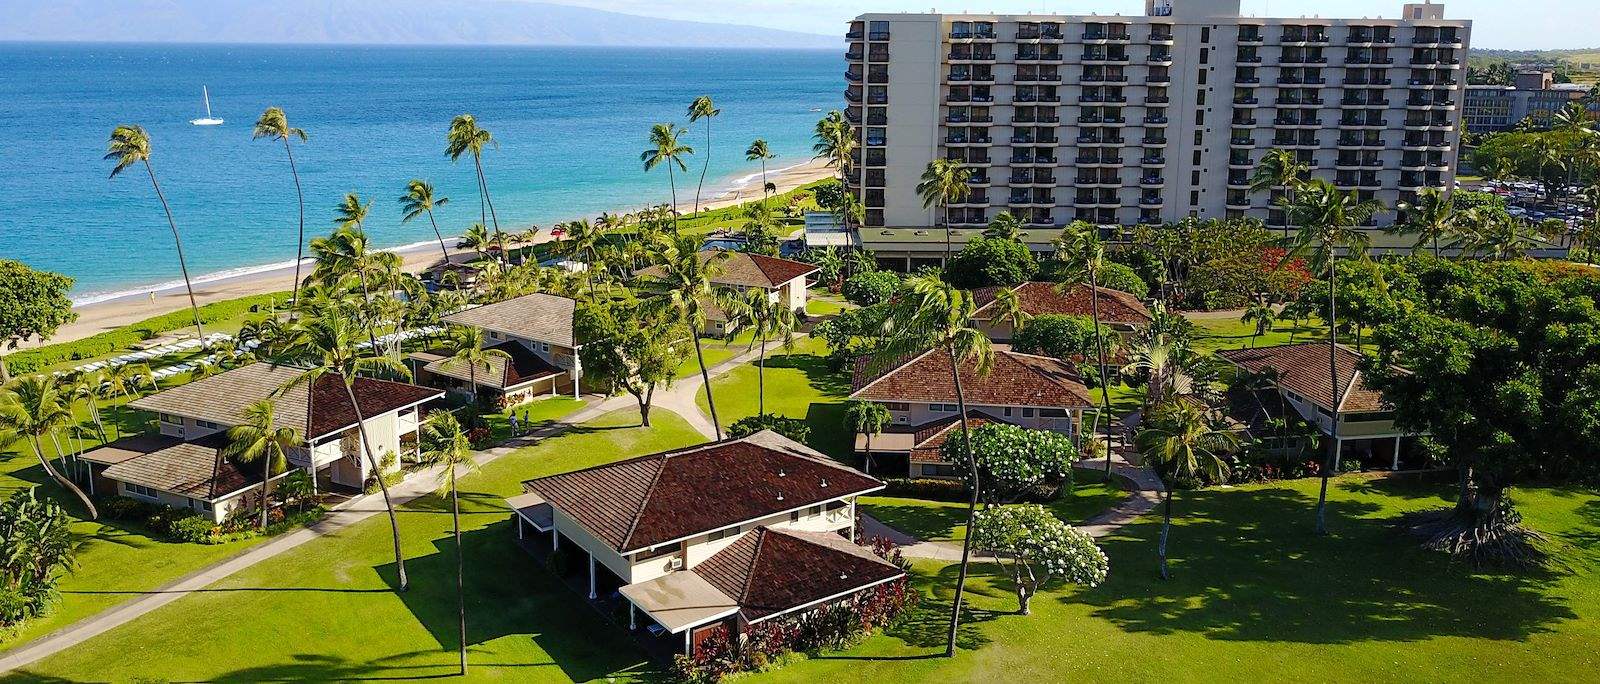 Royal Lahaina Resort | Official Site